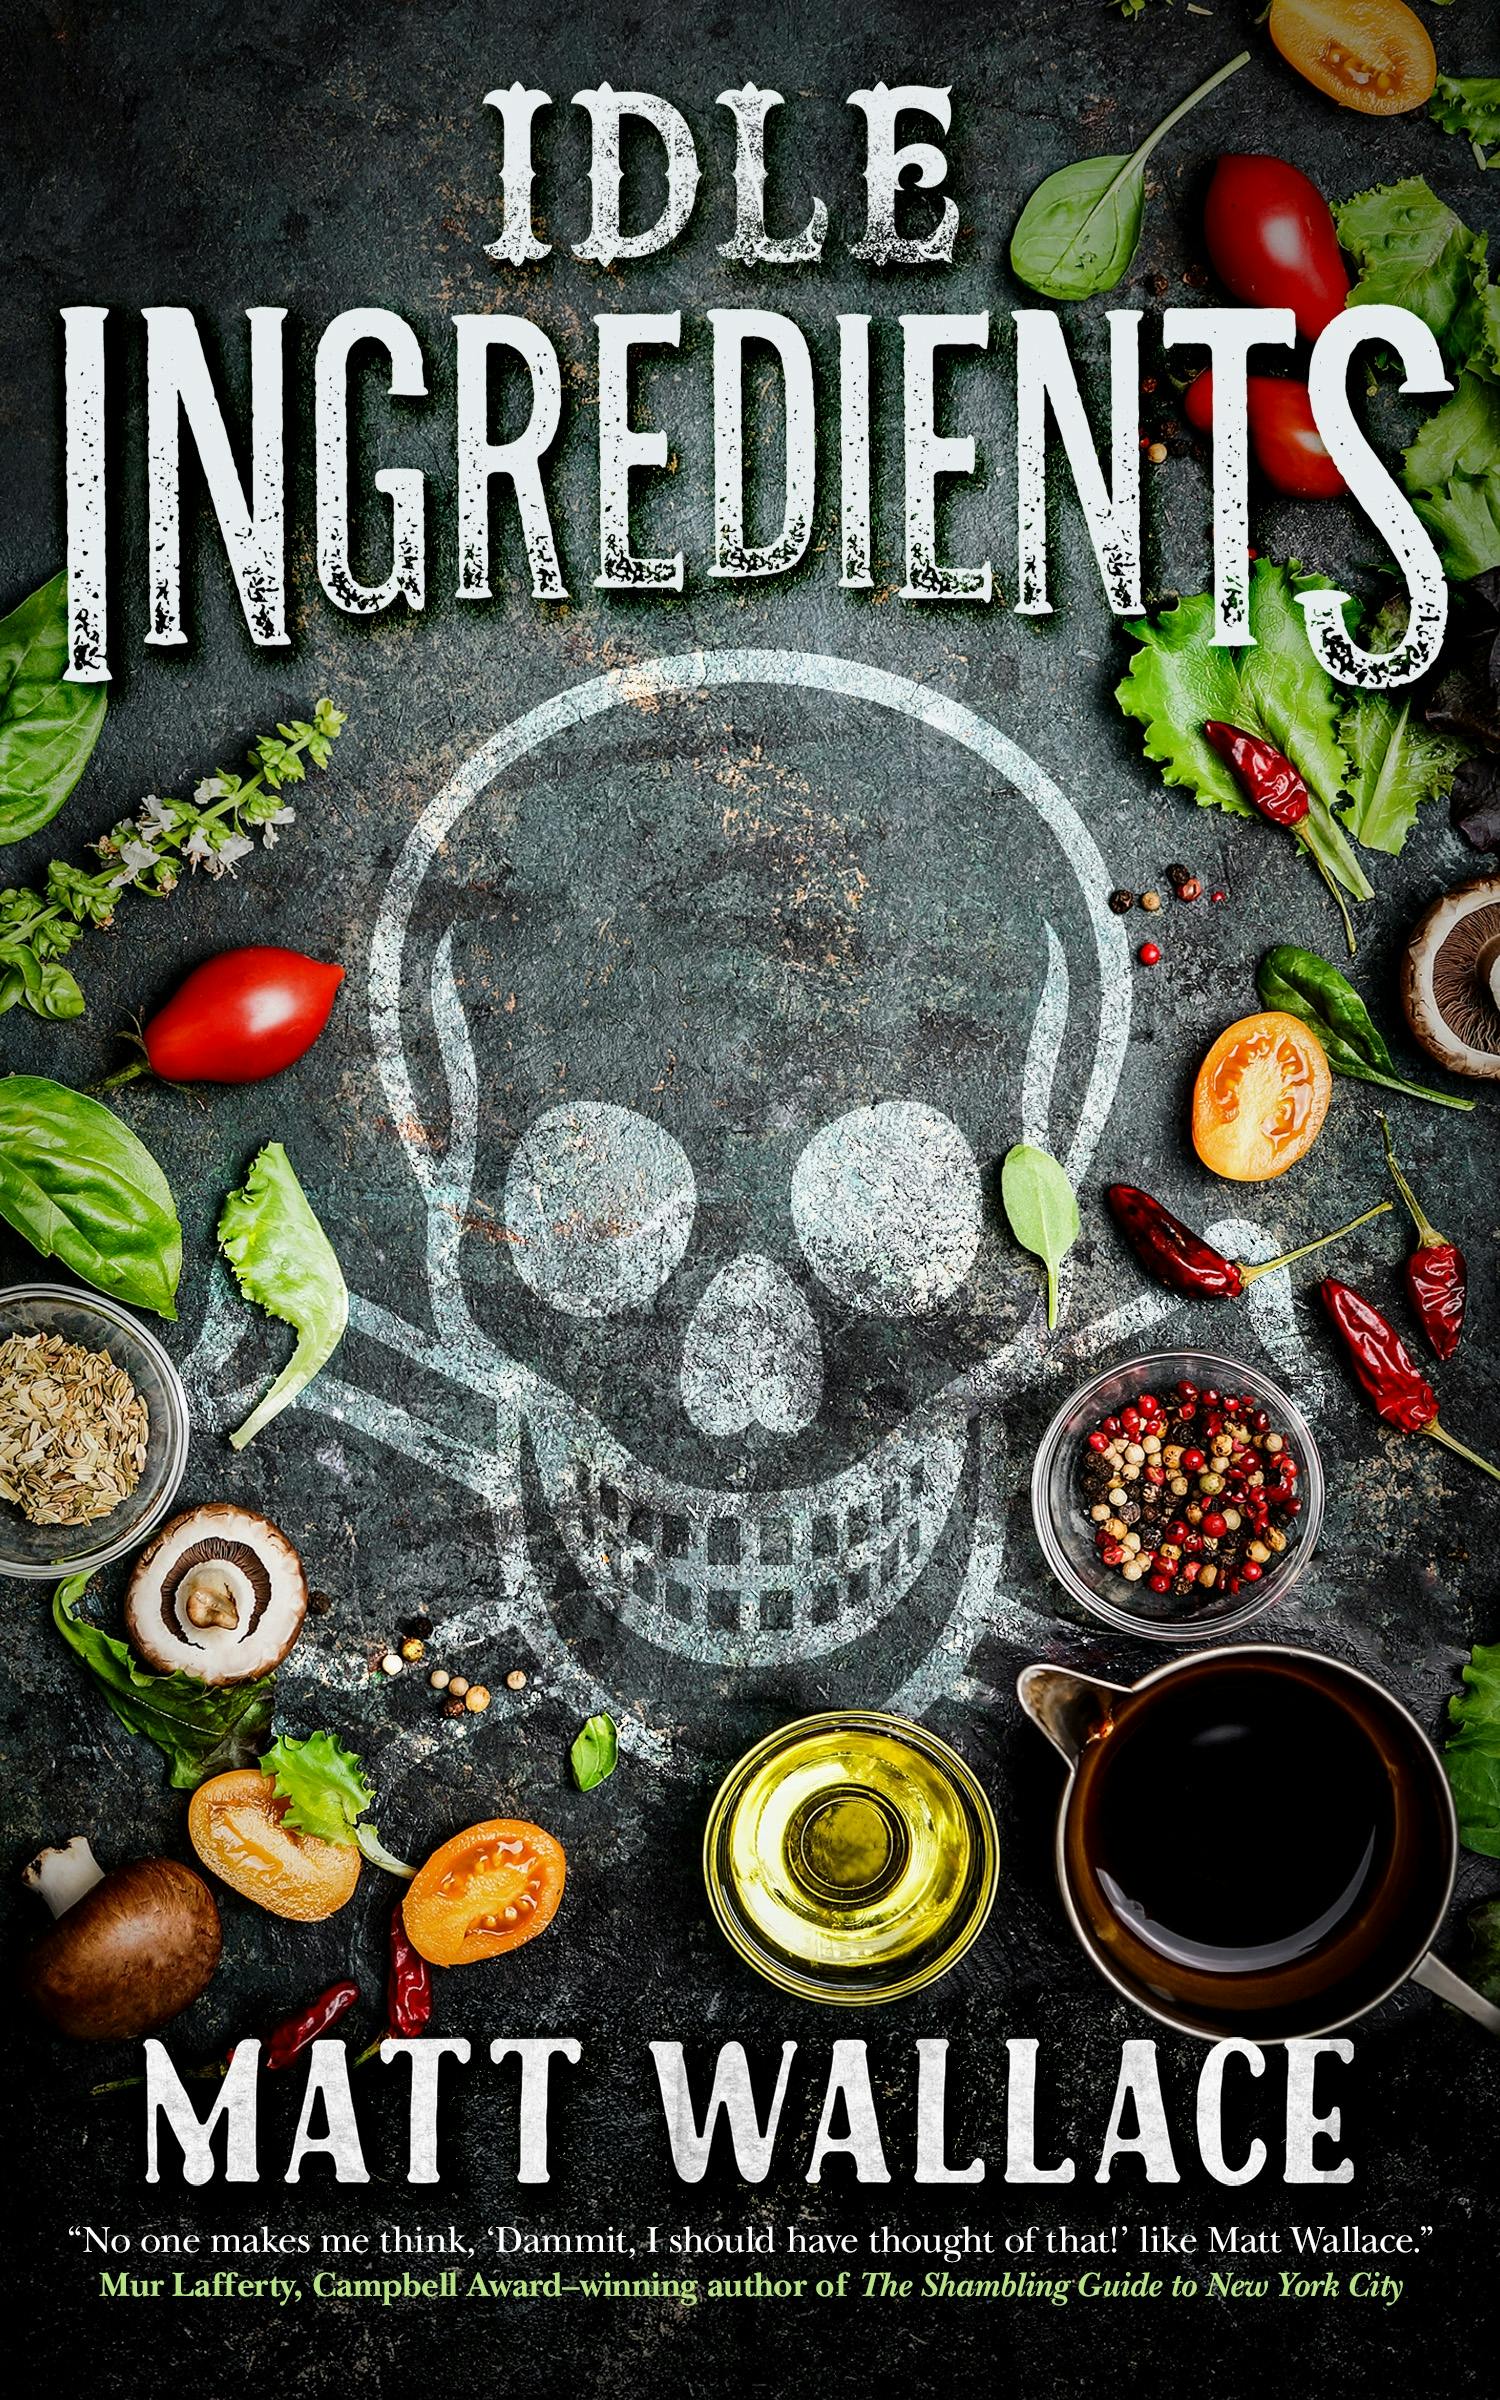 Cover for the book titled as: Idle Ingredients